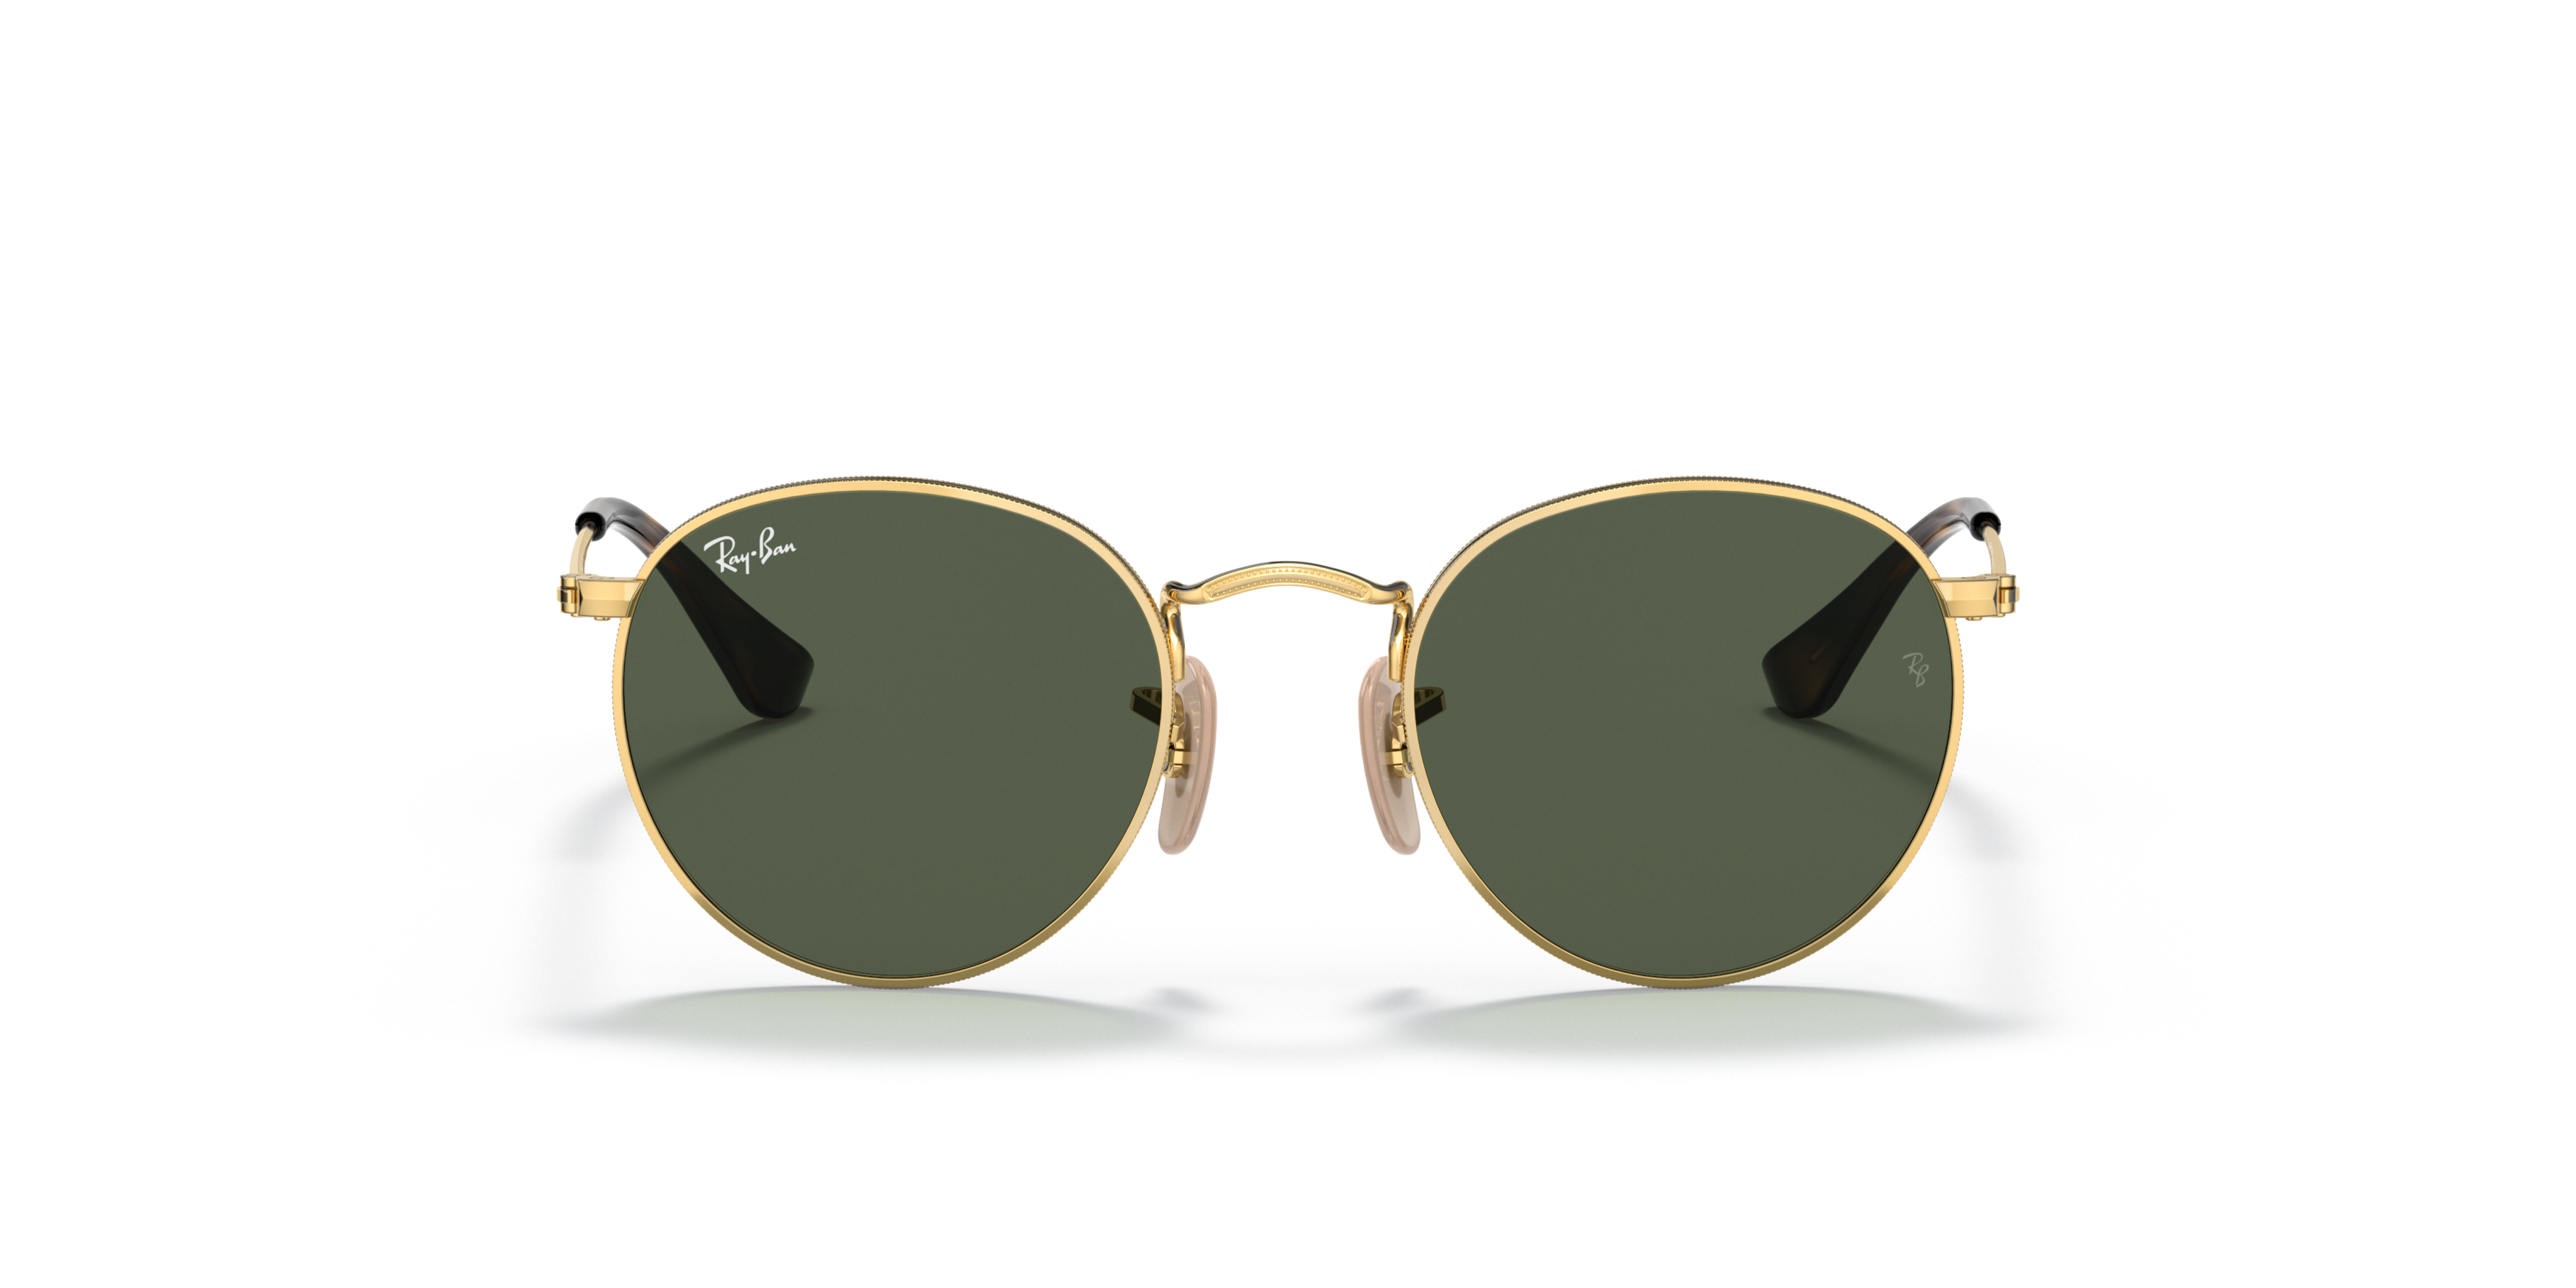 [products.image.front] RAY-BAN RJ9547S 223/71